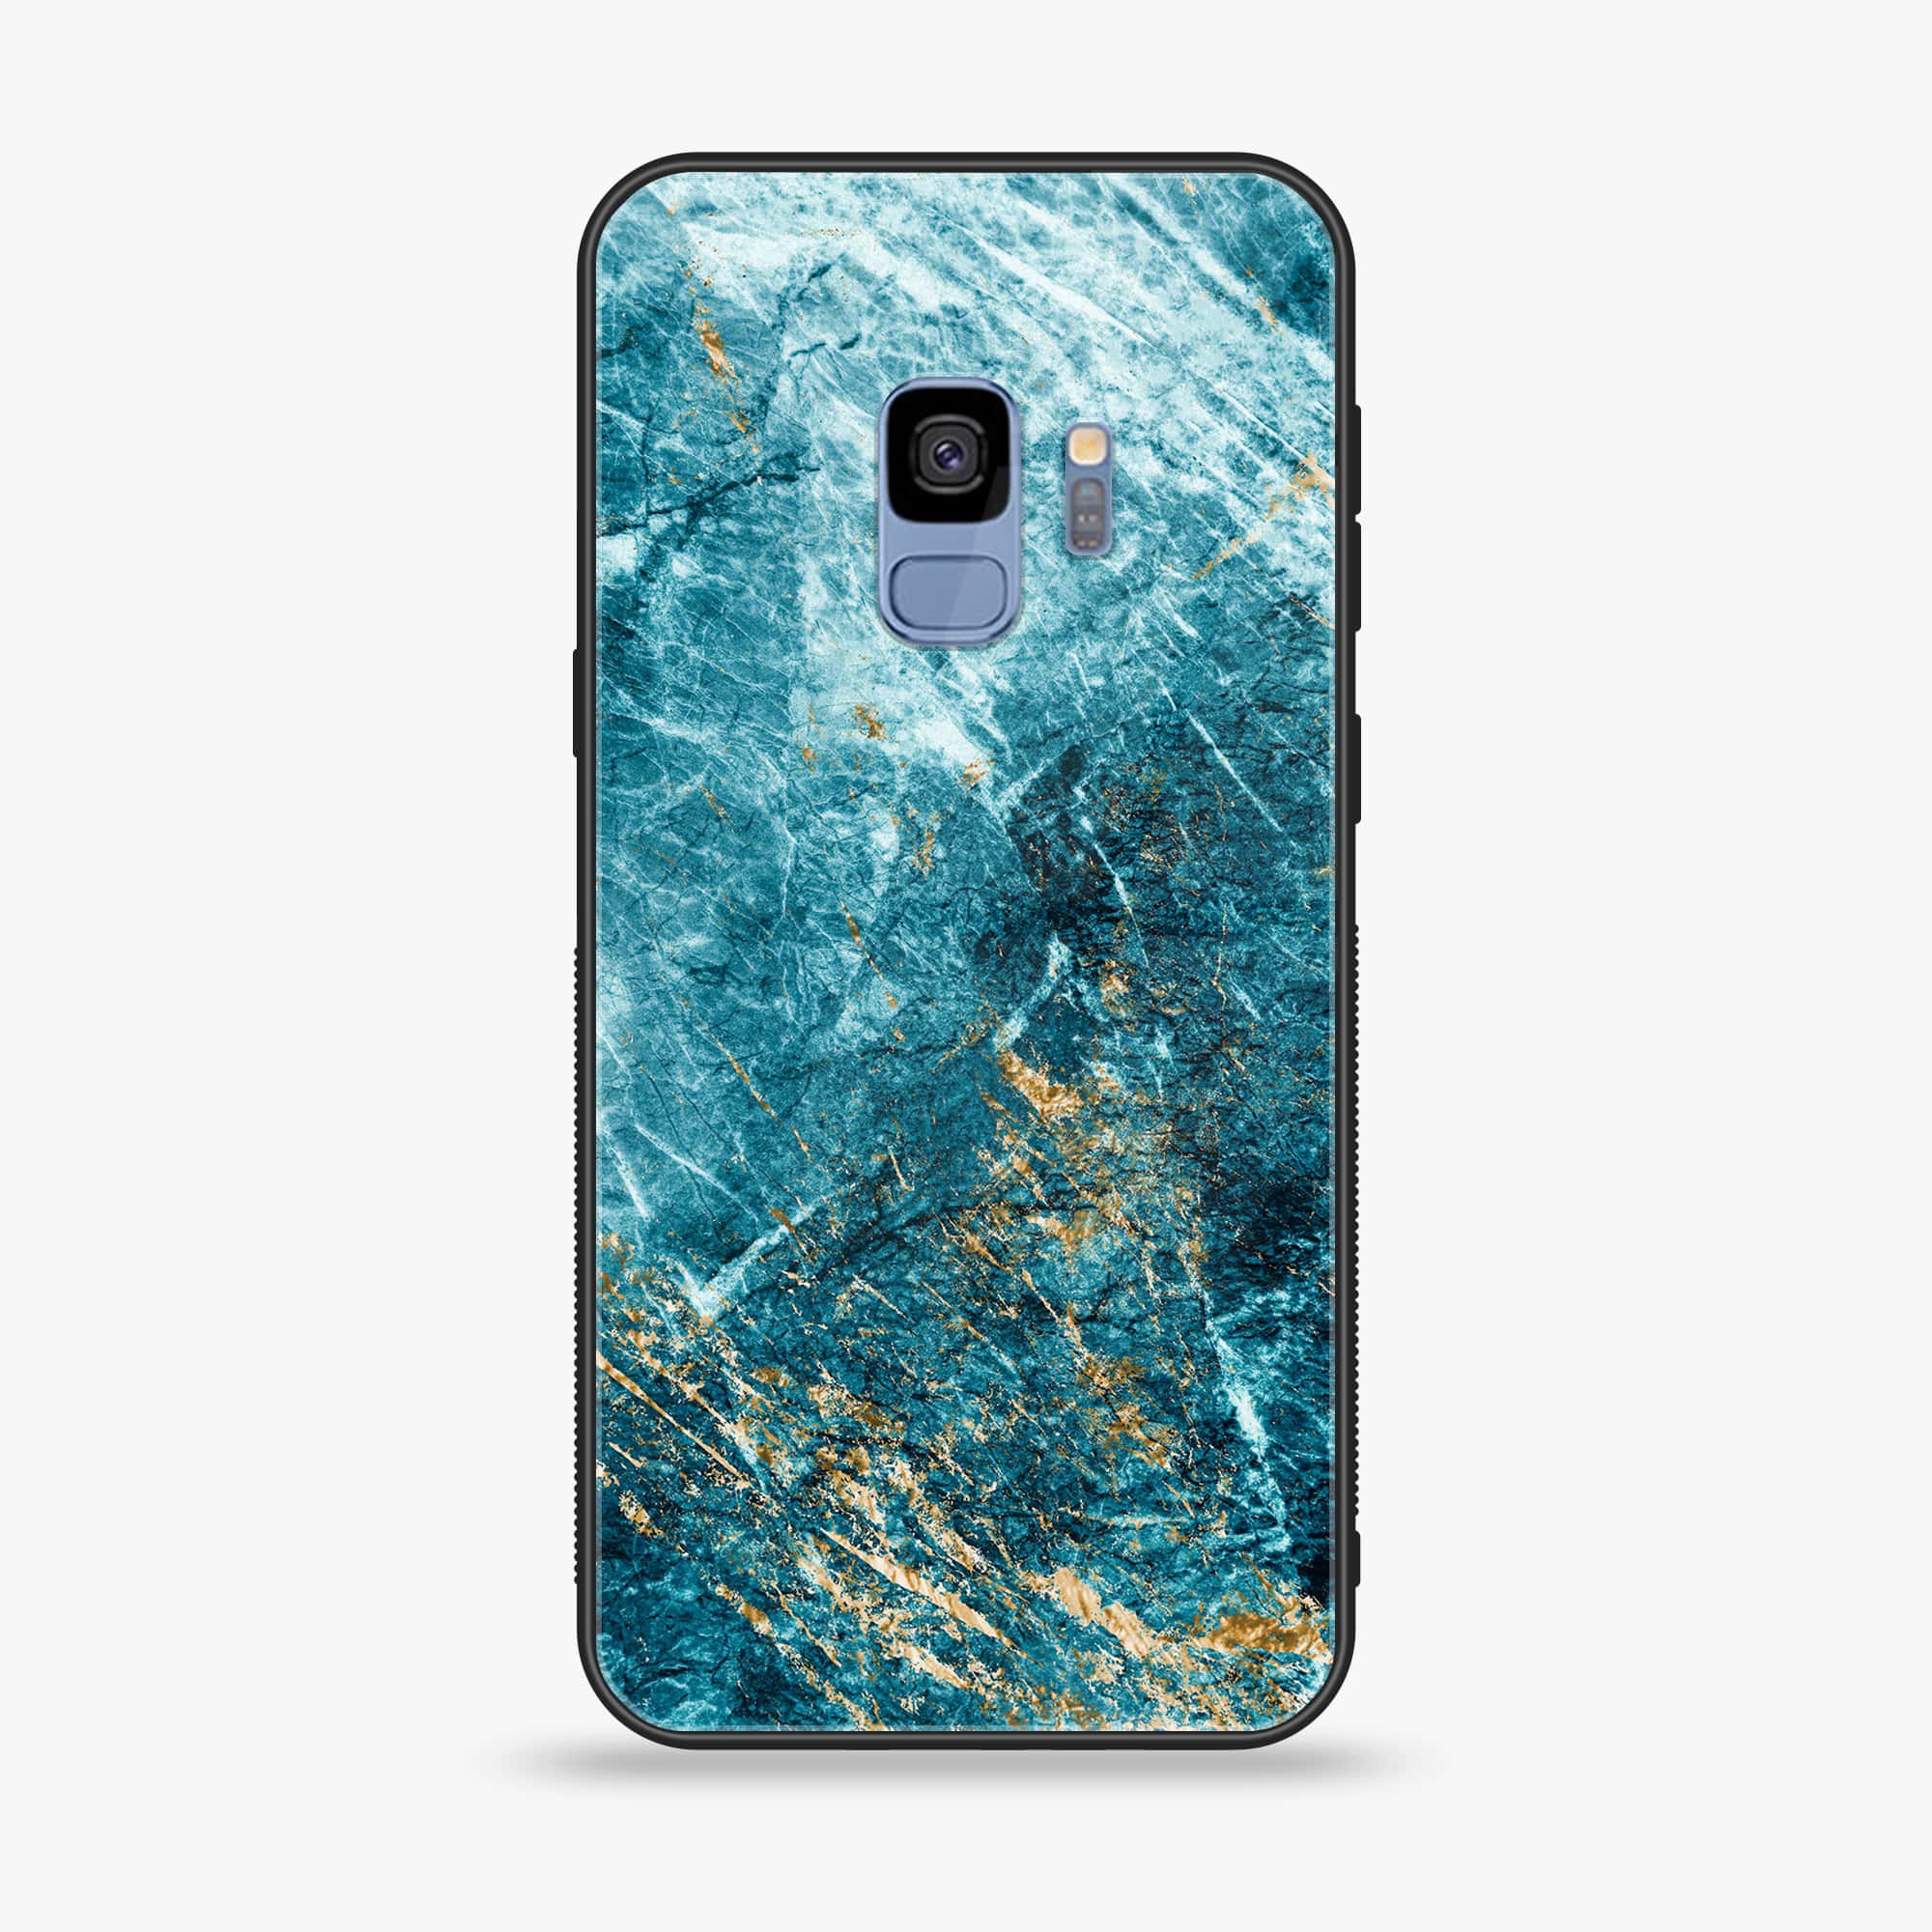 Galaxy S9 - Blue Marble Series V 2.0 - Premium Printed Glass soft Bumper shock Proof Case